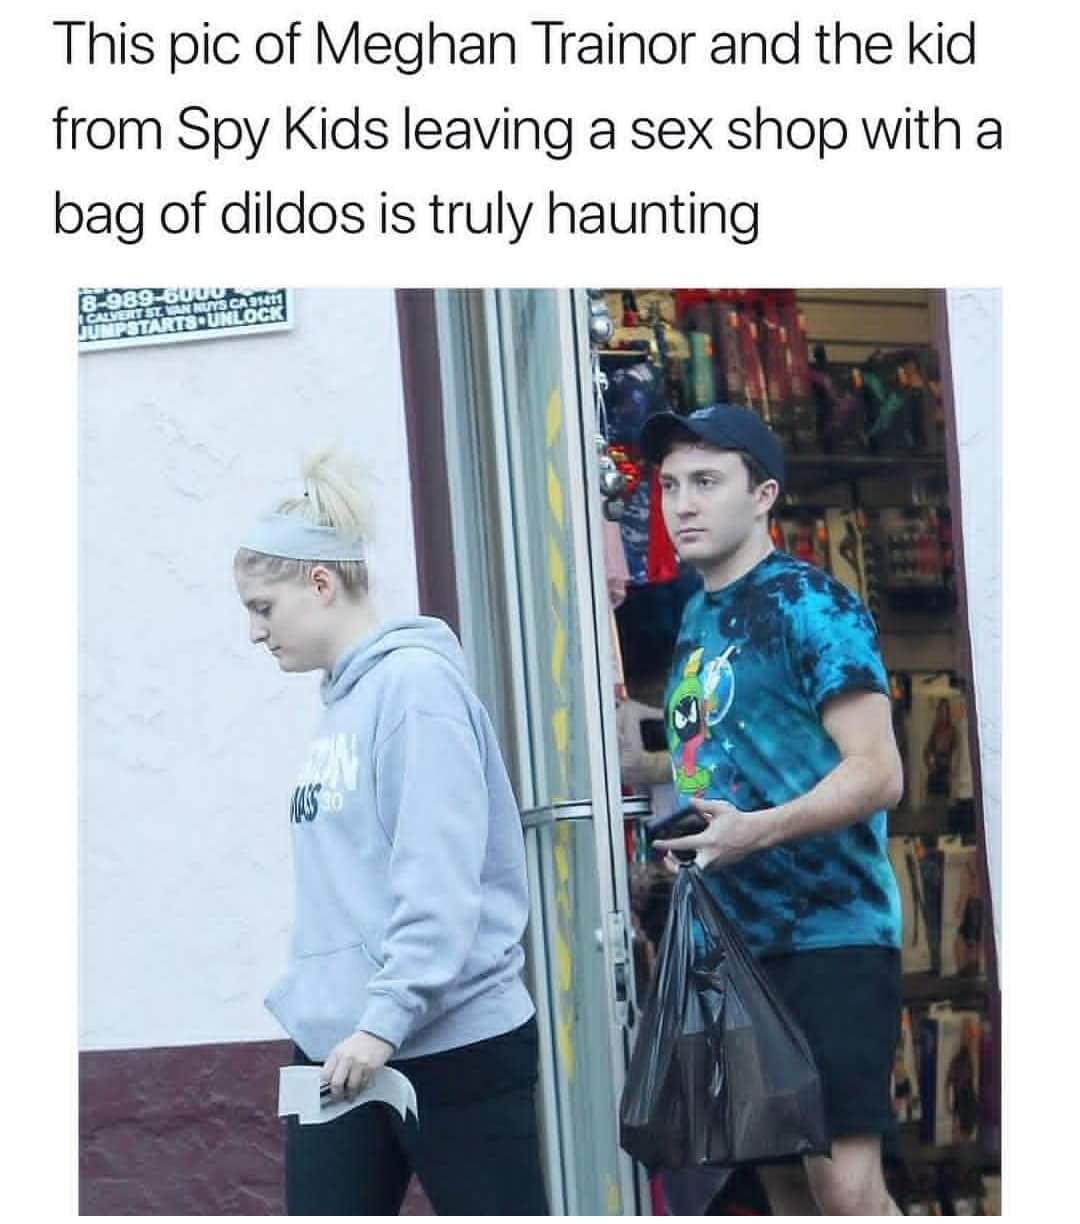 meghan trainor spy kids meme - This pic of Meghan Trainor and the kid from Spy Kids leaving a sex shop with a bag of dildos is truly haunting 896000 Det Sl Annunca